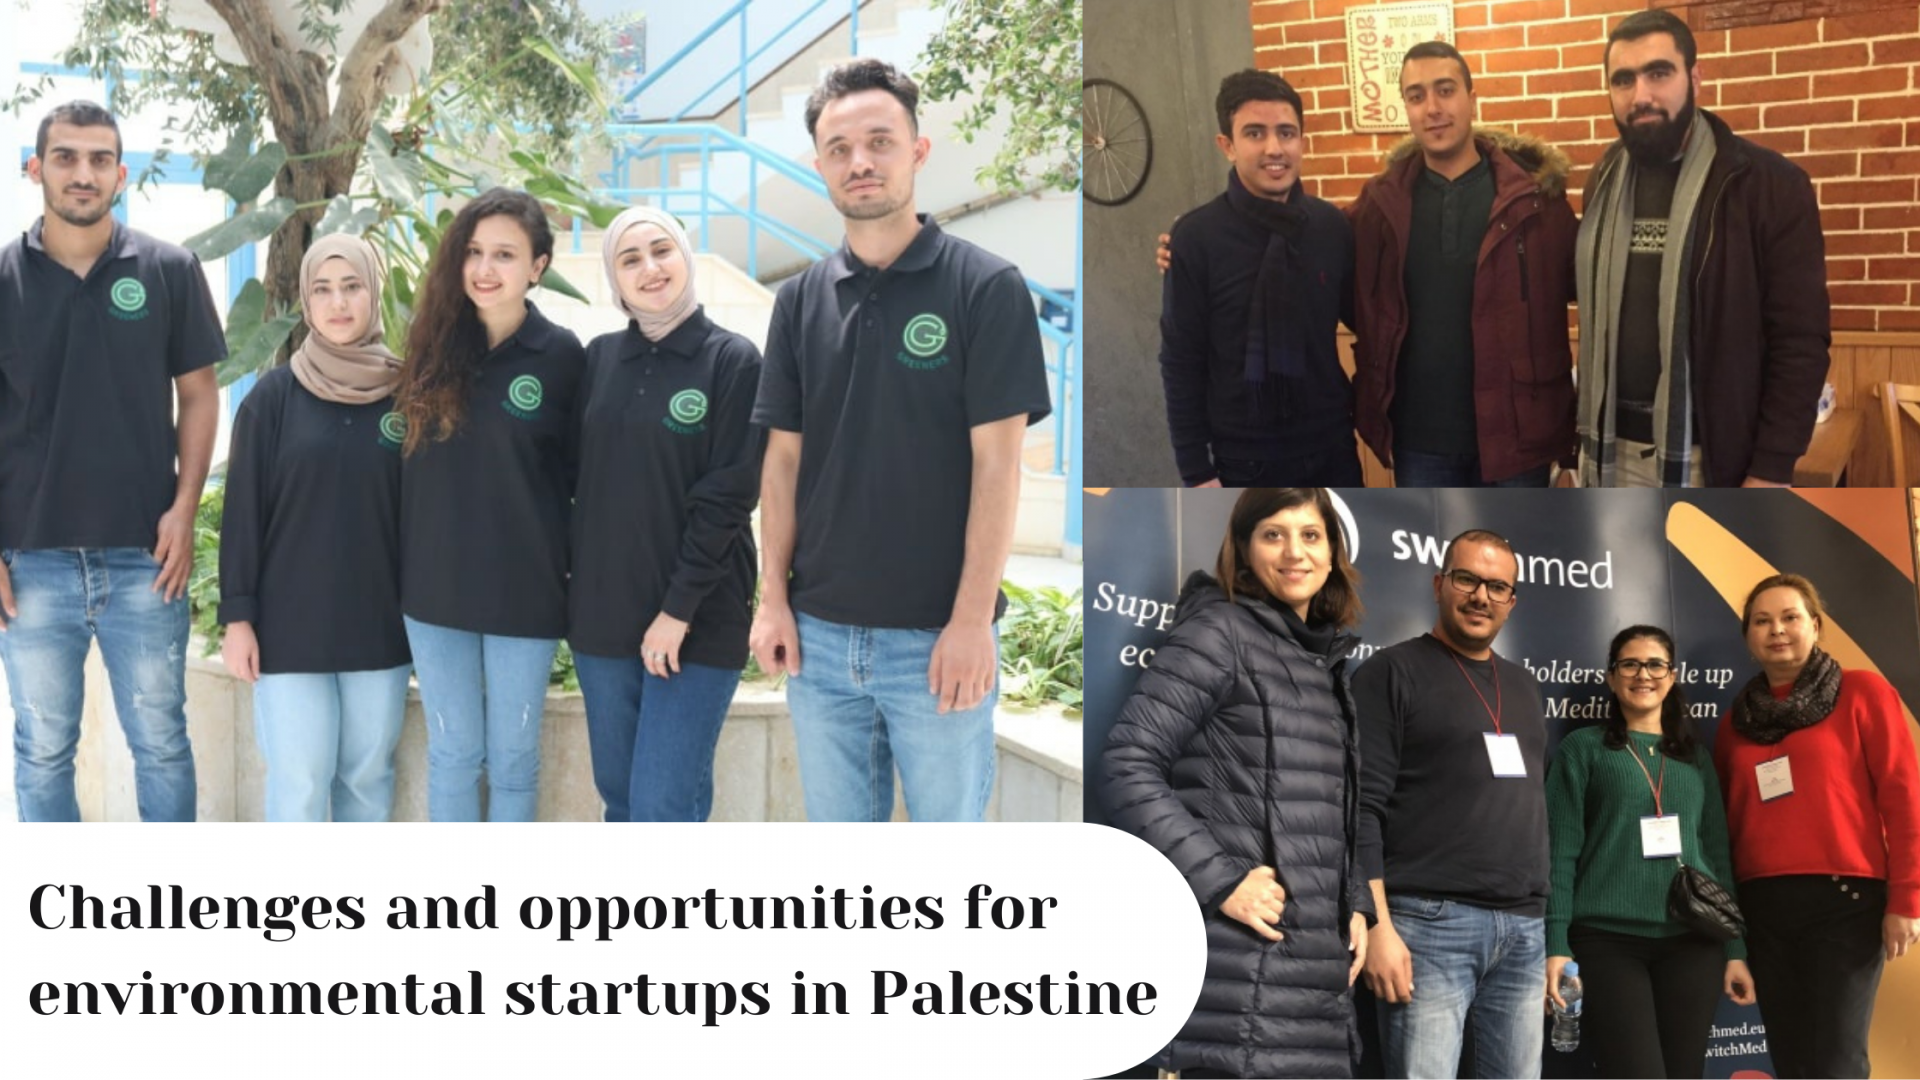 Challenges and opportunities for environmental startups in Palestine